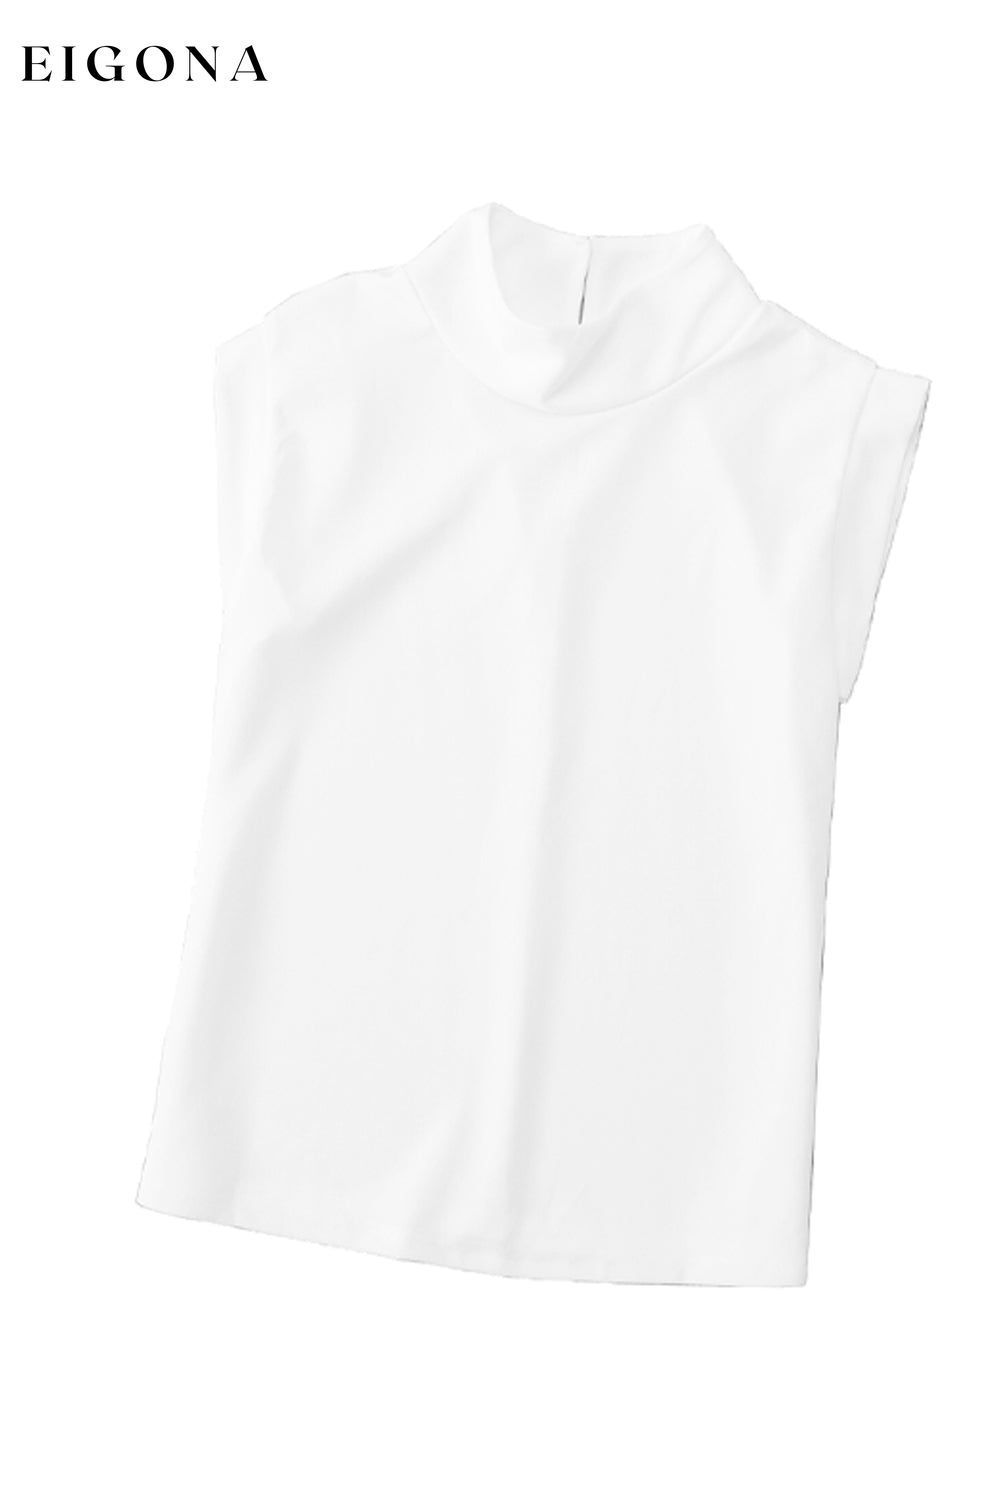 White Solid Color Mock Neck Sleeveless Top clothes clothing Occasion Office Print Solid Color Season Summer short sleeve Style Modern tops Women's Clothing